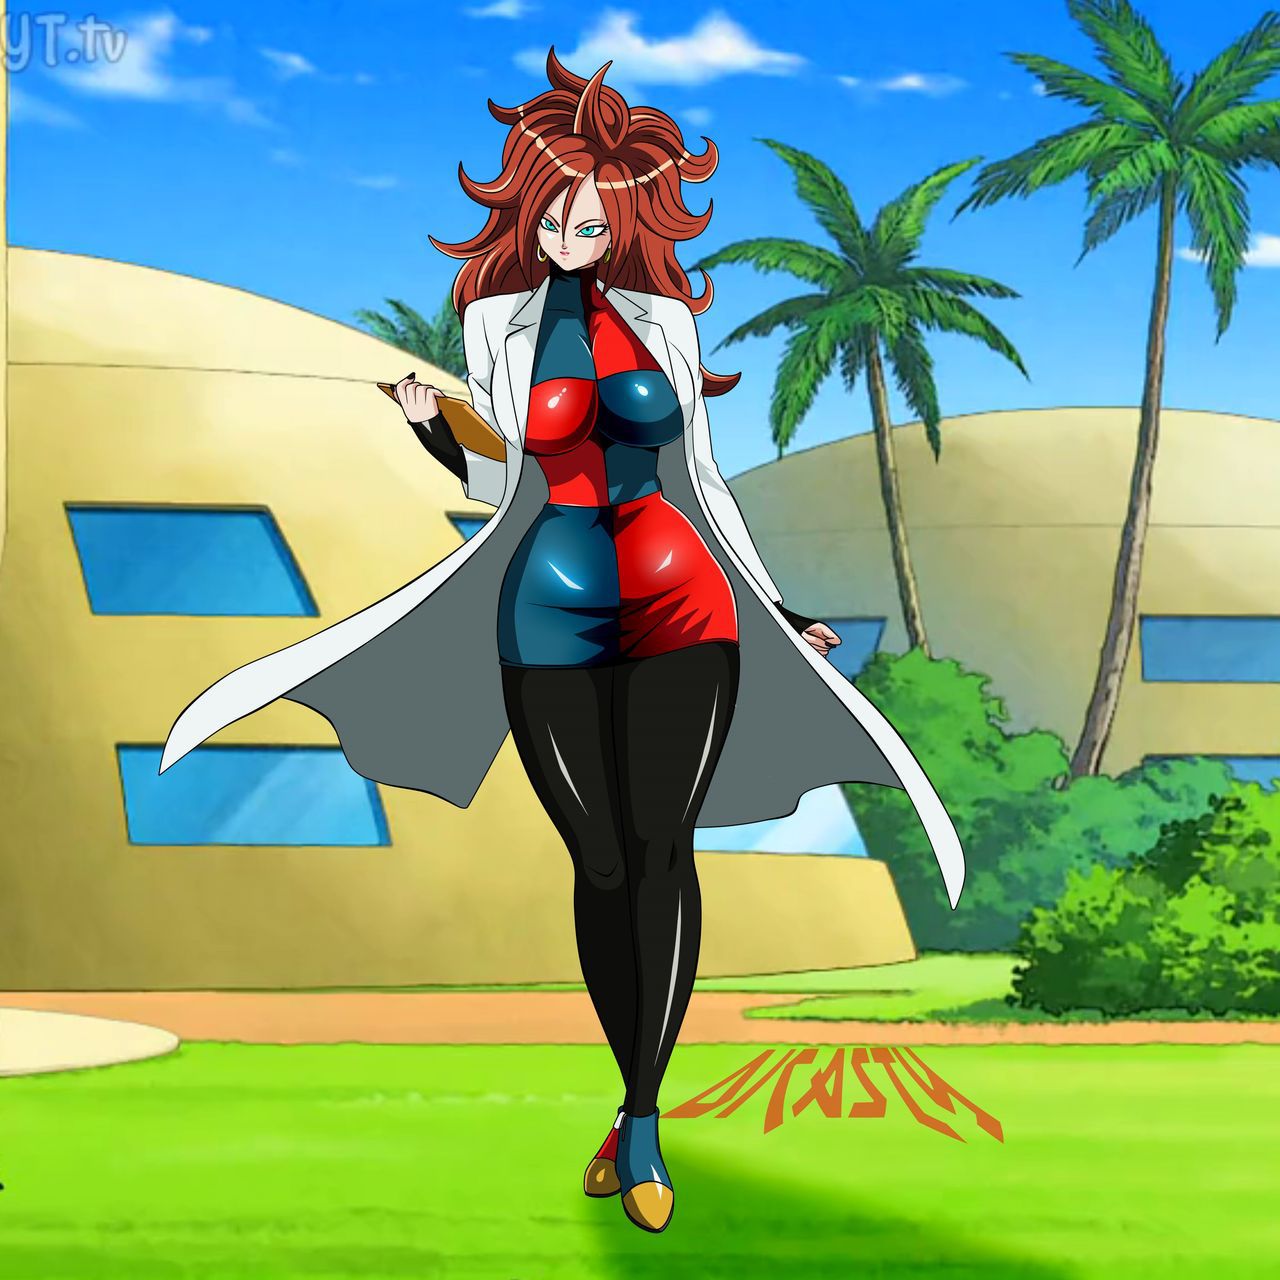 My Favorite Android 21 Pics 34